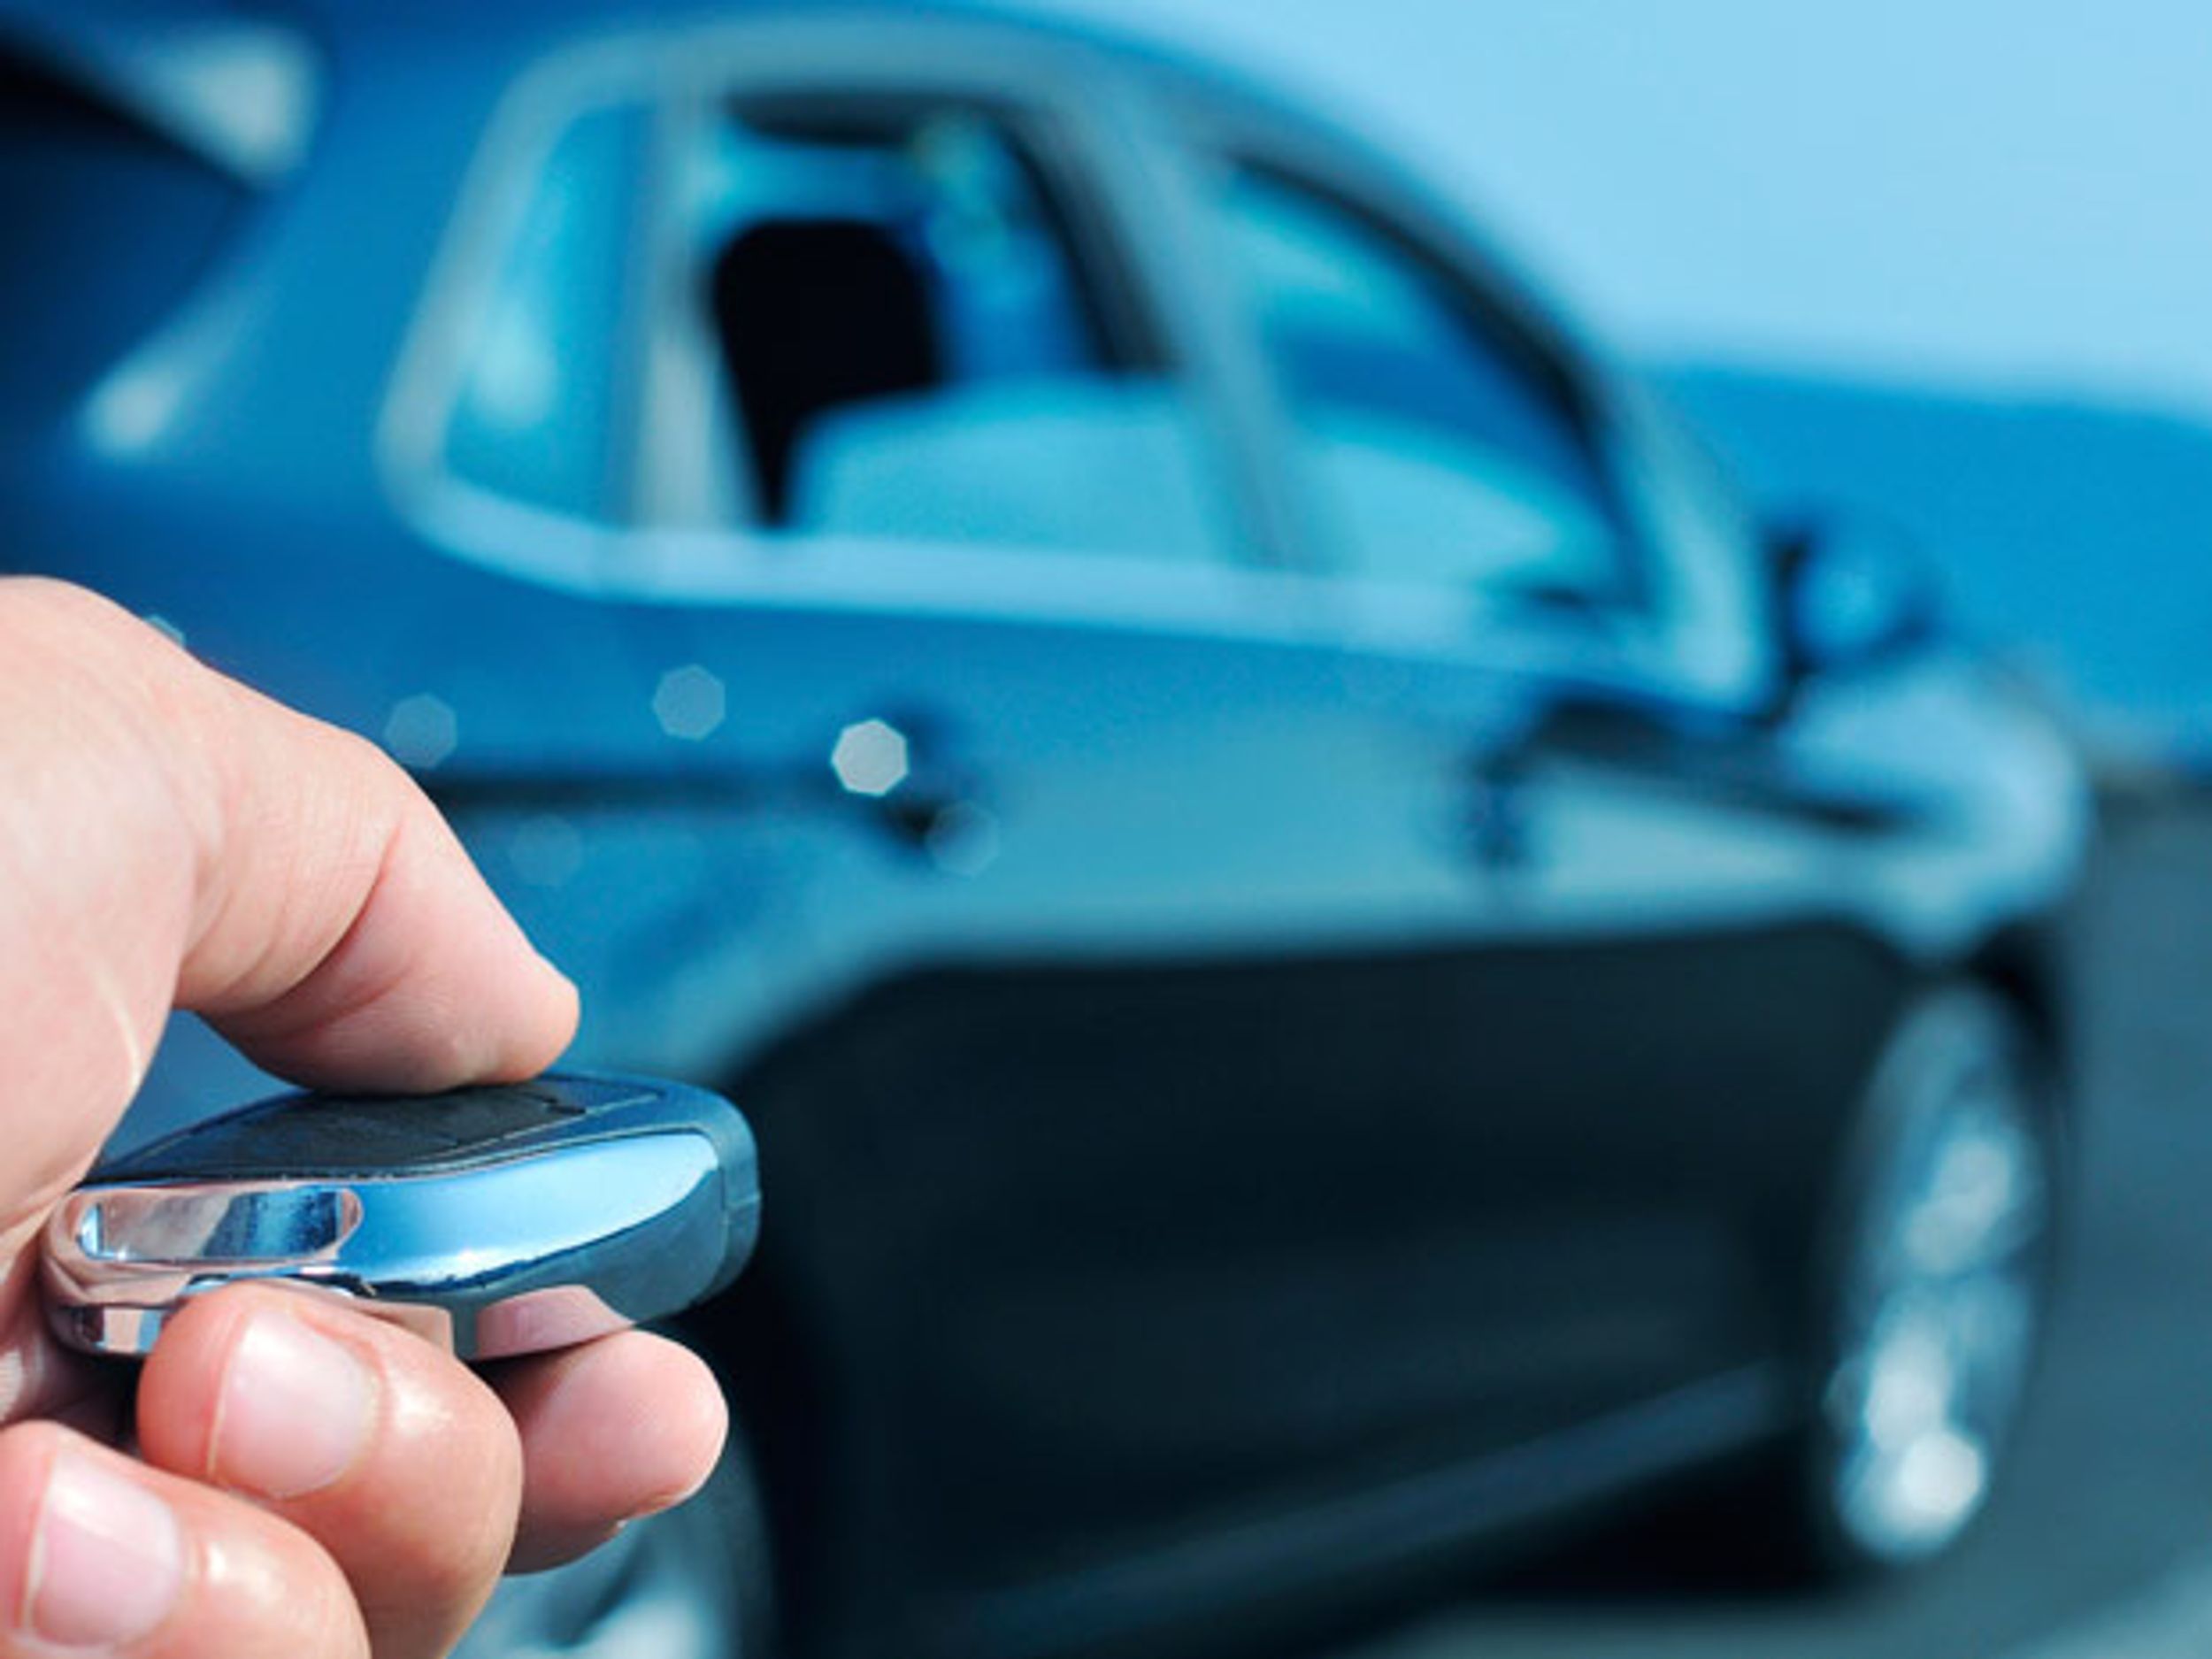 Car Thieves Use Handheld Electronics to Steal Keyless Cars